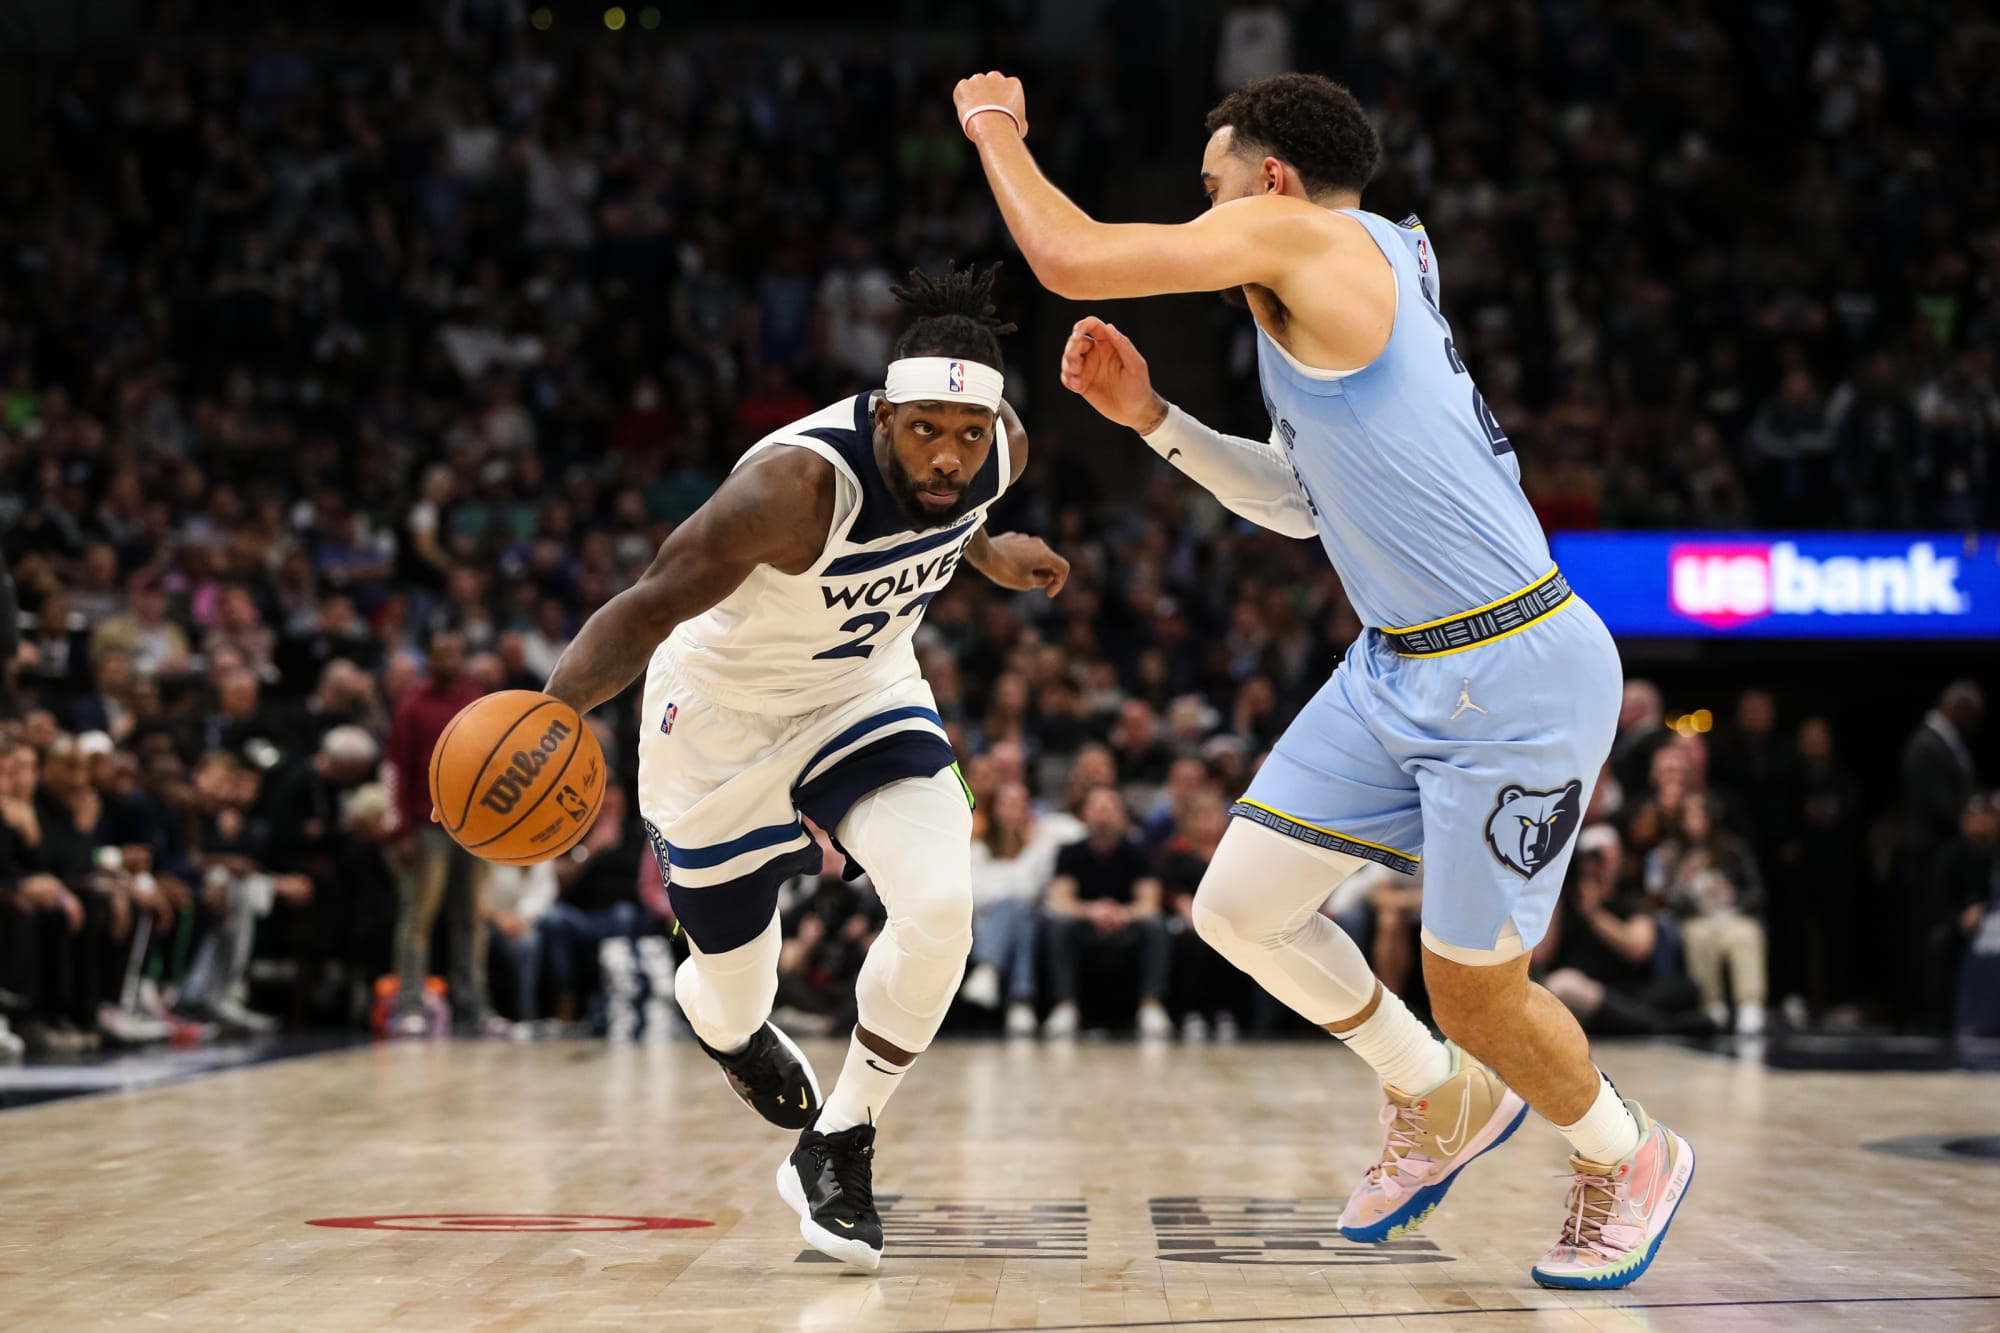 Photo of Grizzlies, Timberwolves can’t play basketball without protestors stopping games